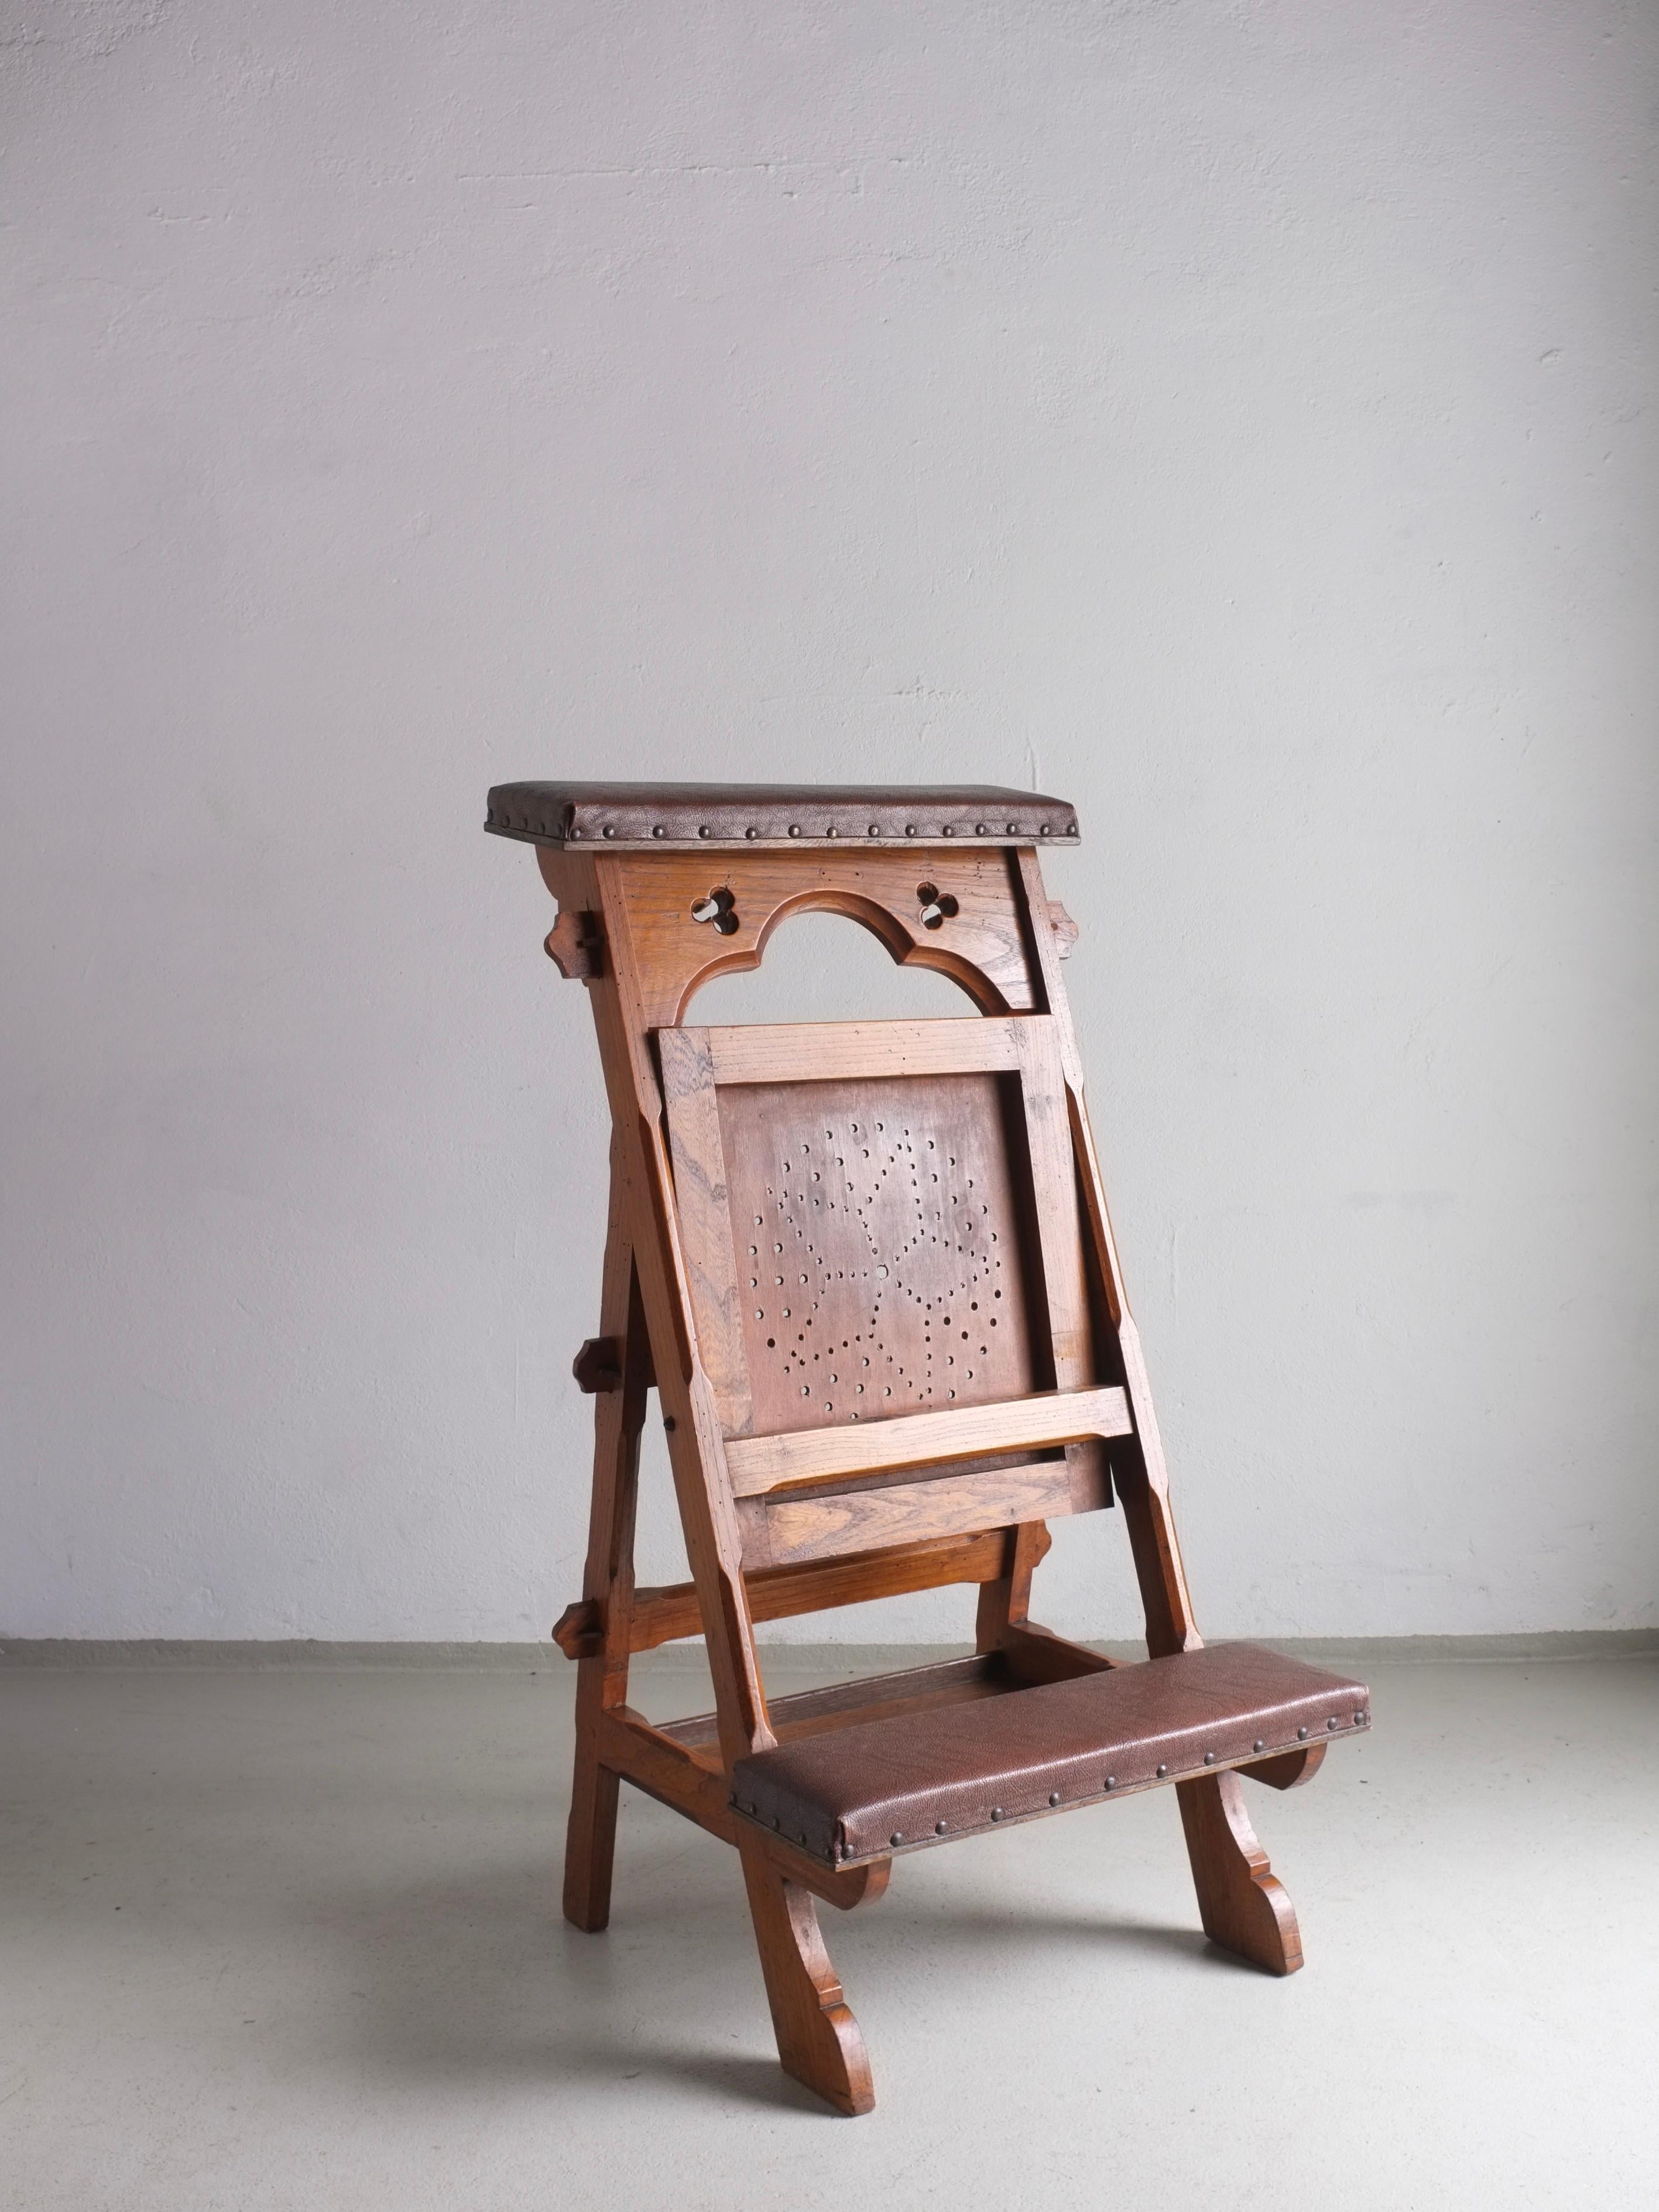 Carved wood prayer chair with a folding seat, upholstered with faux leather.